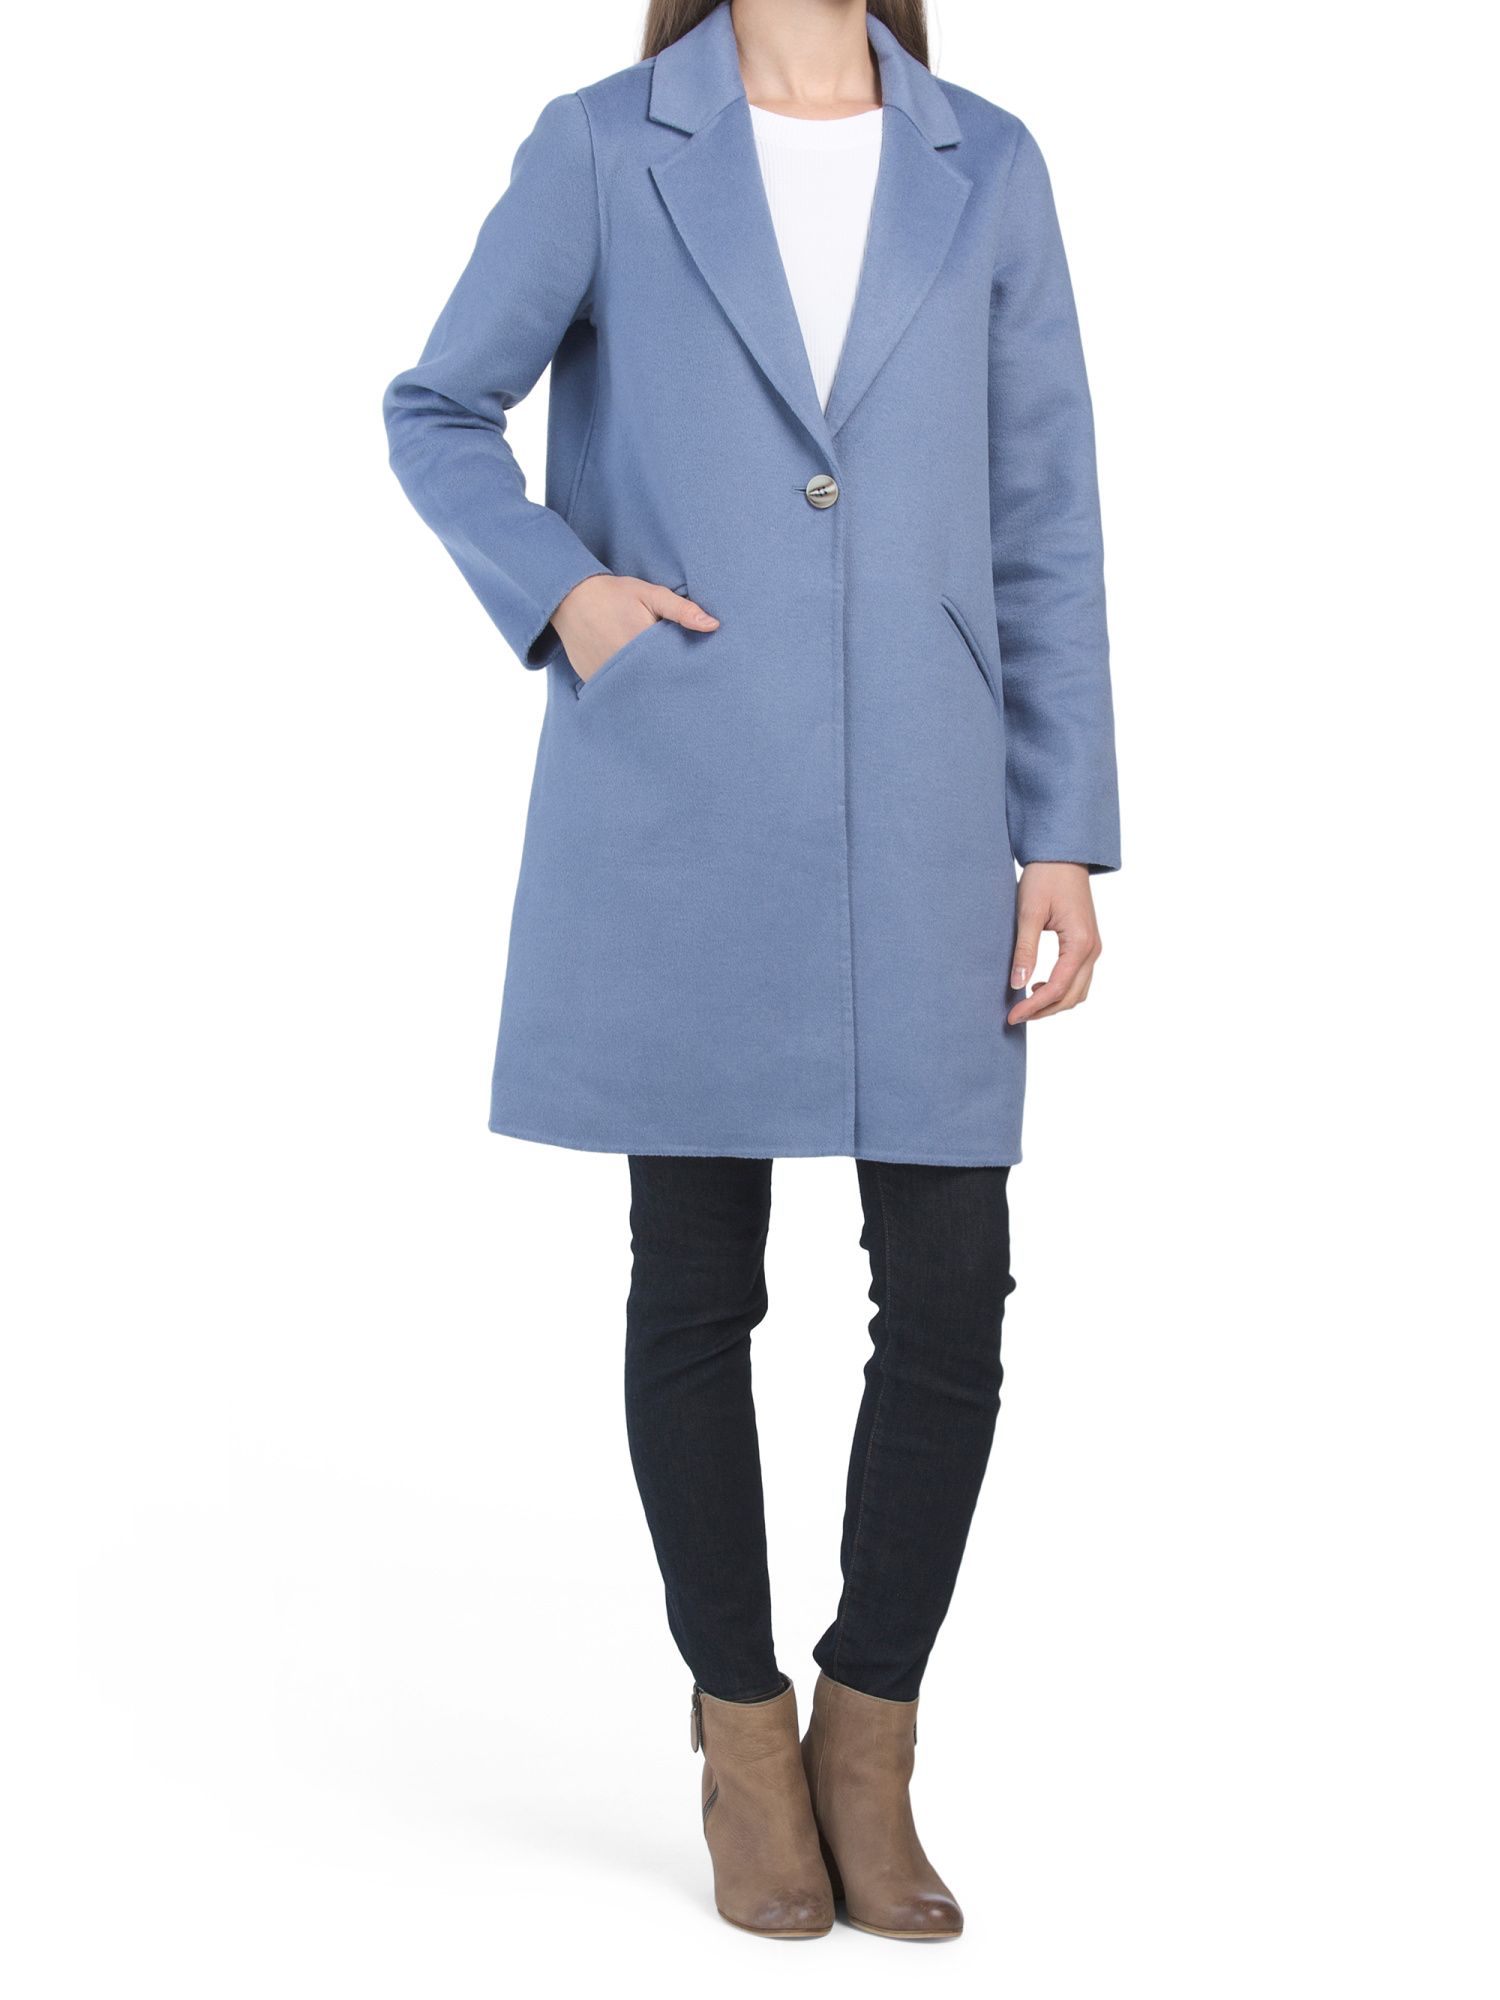 Wool Blend Double Face Coat | Midweight Jackets | Marshalls | Marshalls